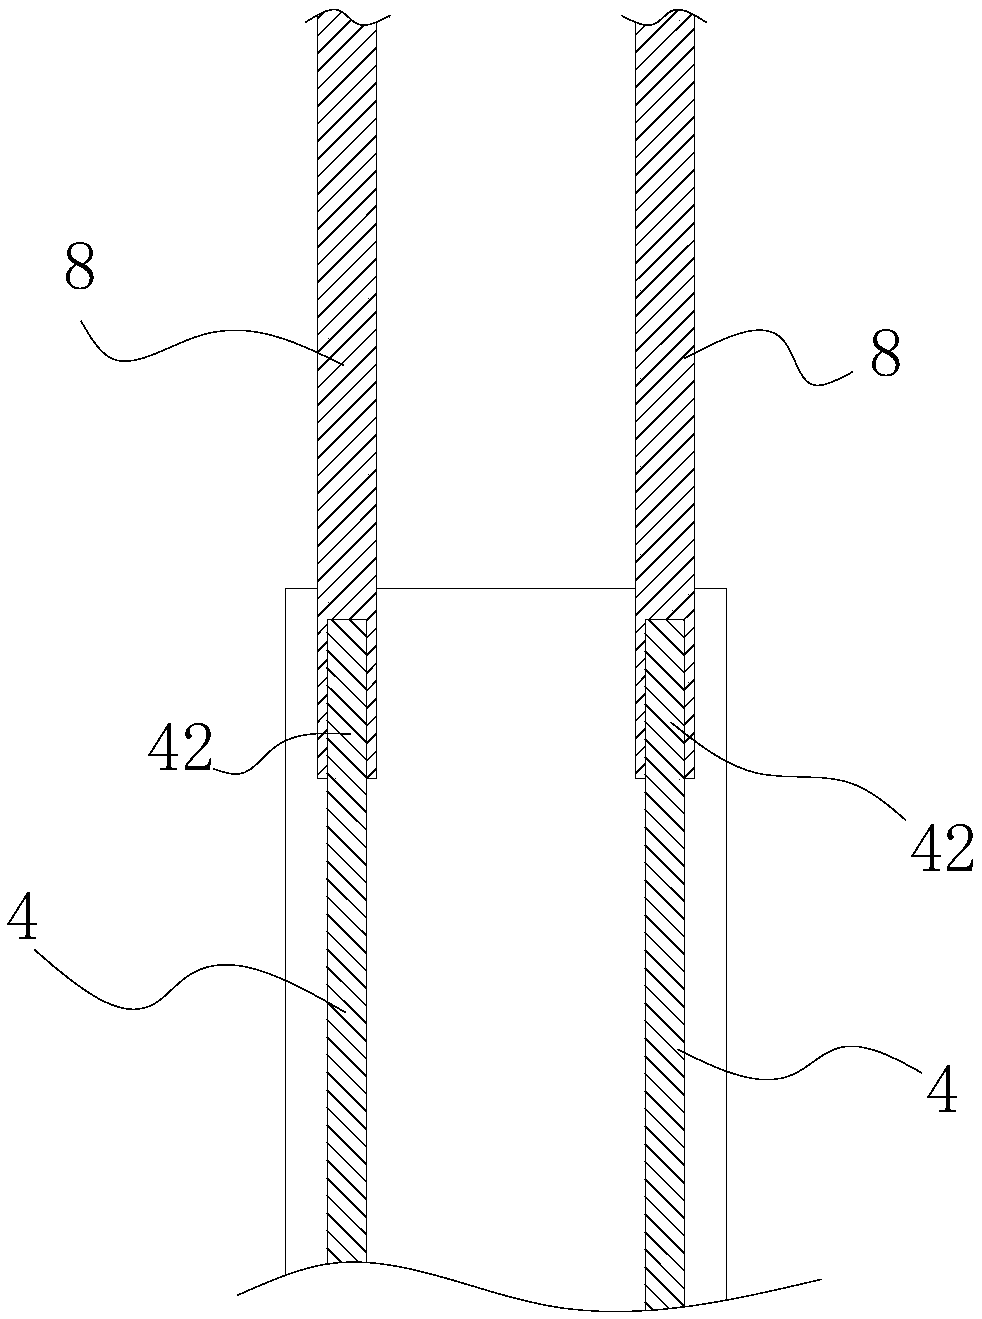 Anchoring connection method pulling-resistant device for single pile vertical pulling-resistant static load test